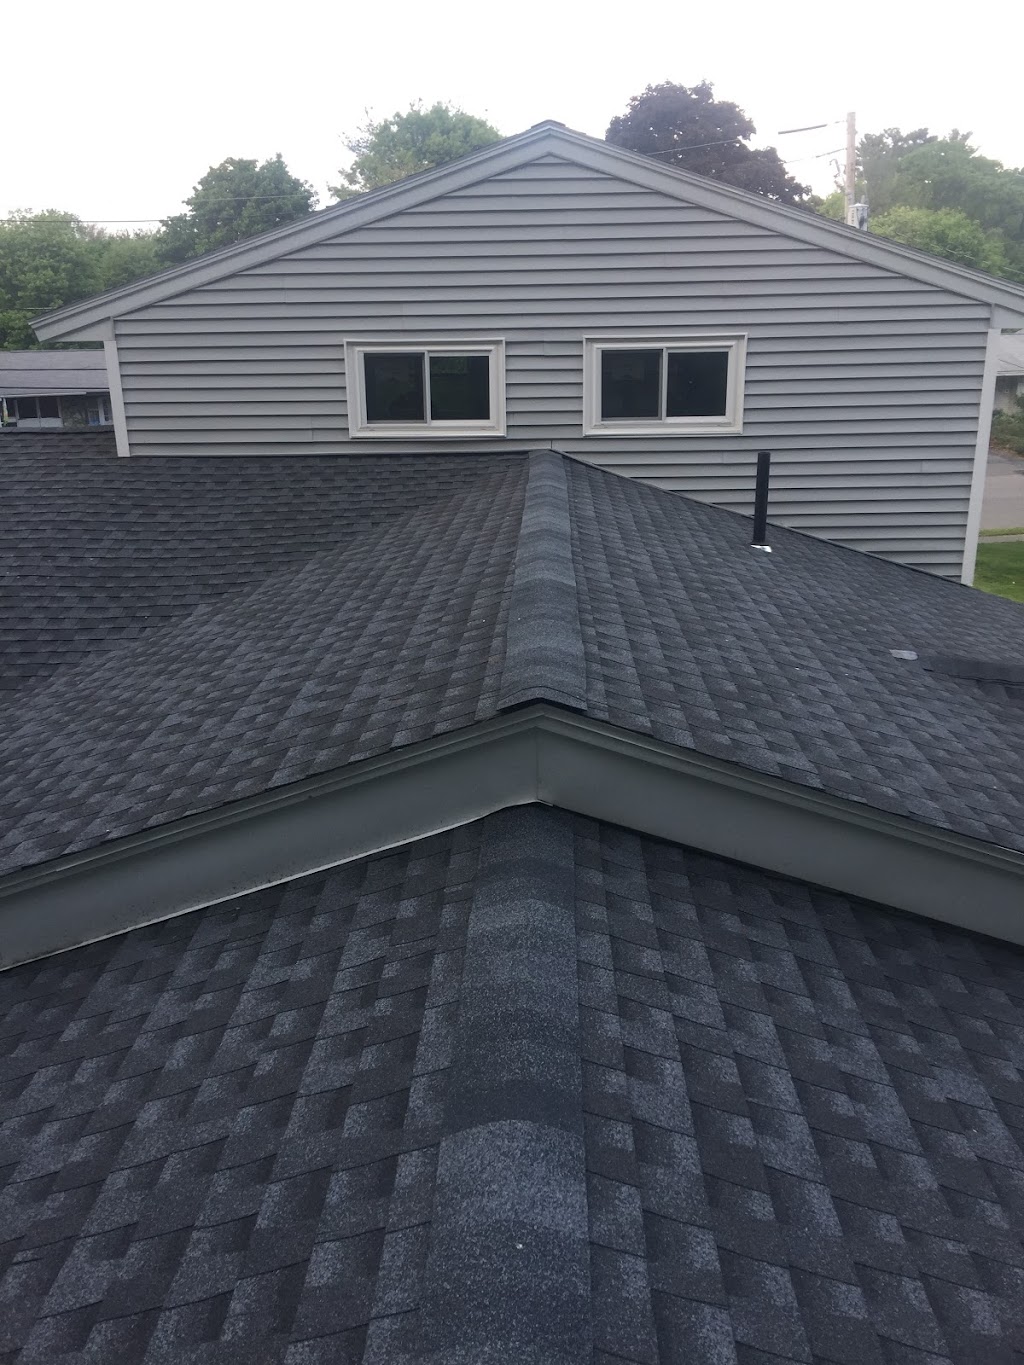 North Shore Roofing | 421 Broadway, Lynn, MA 01904, USA | Phone: (978) 977-3816